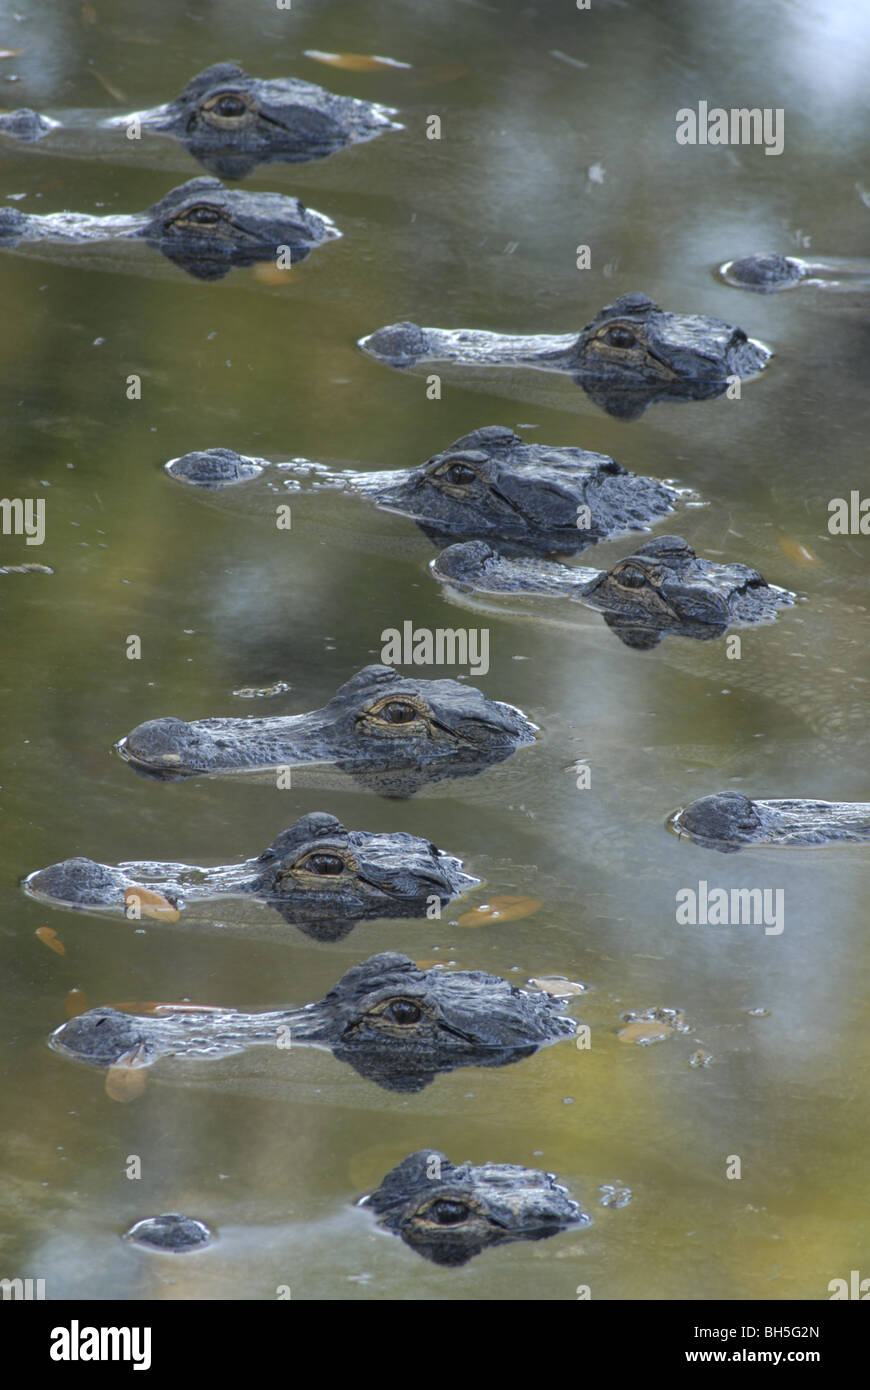 These crocodilians live in a mix of small American alligators, caimans and other species at the St. Augustine Alligator Farm. Stock Photo